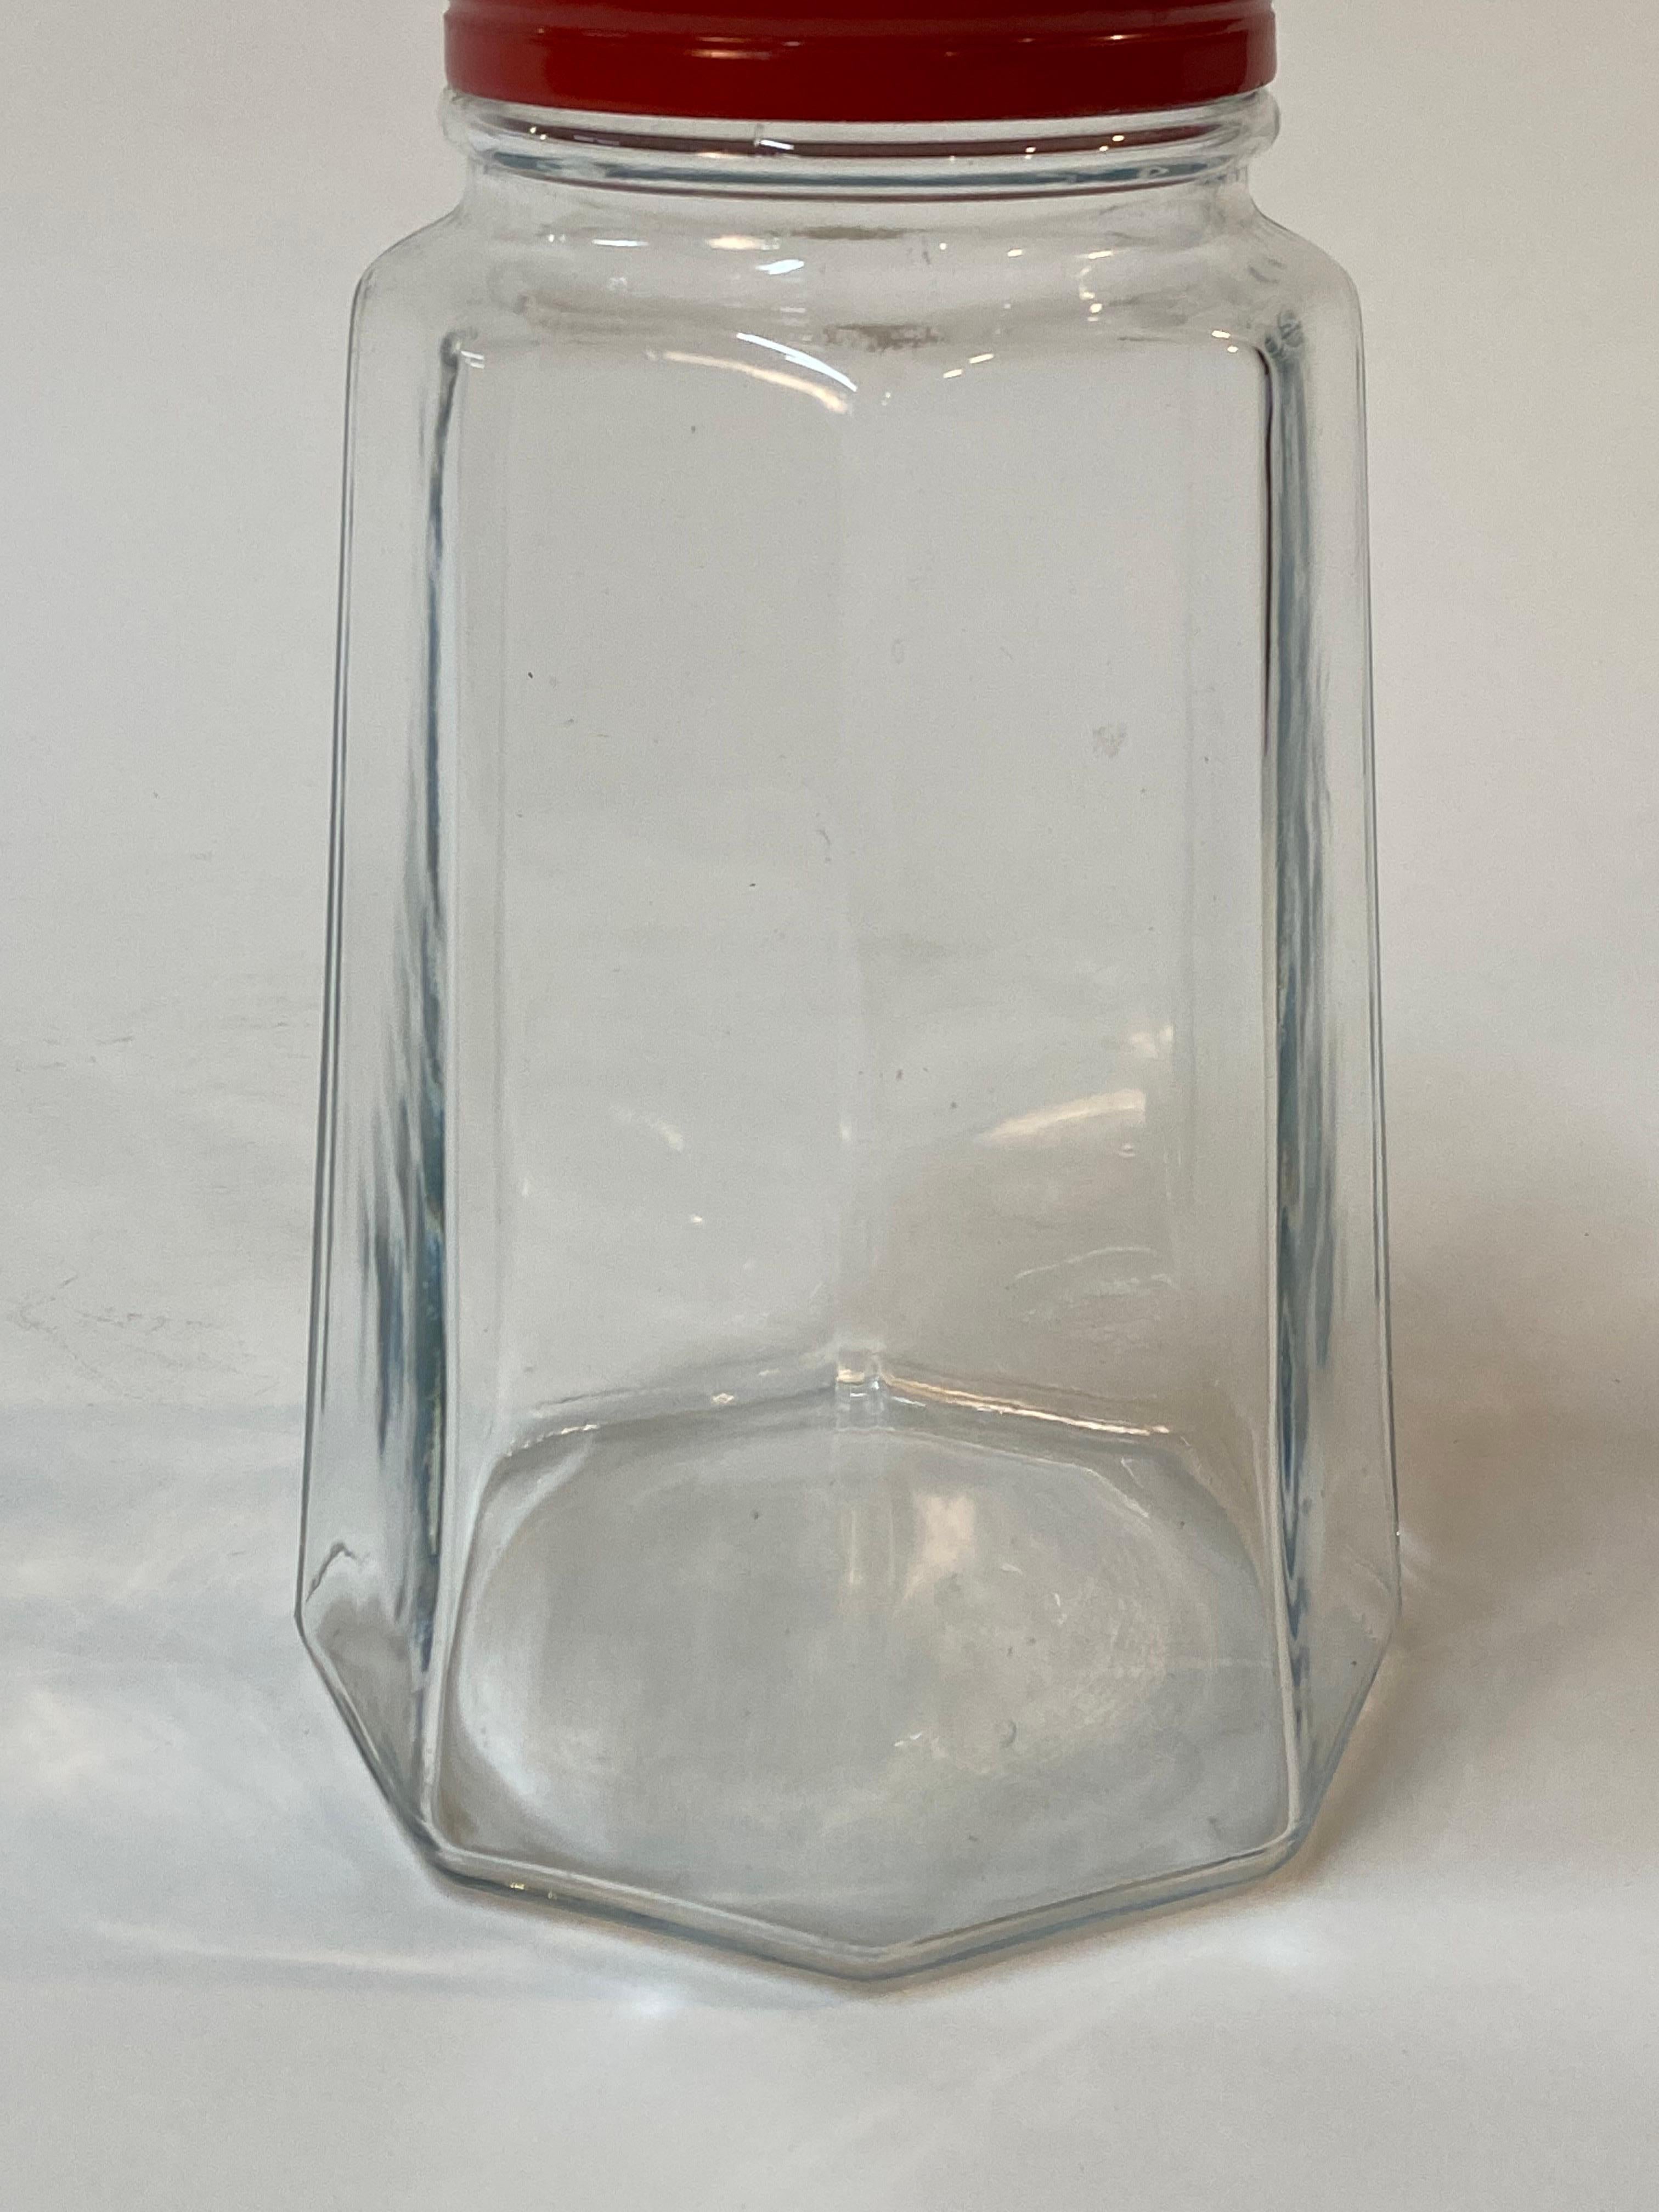 Think Big Post Modern Over Sized Salt Shaker In Good Condition For Sale In Garnerville, NY